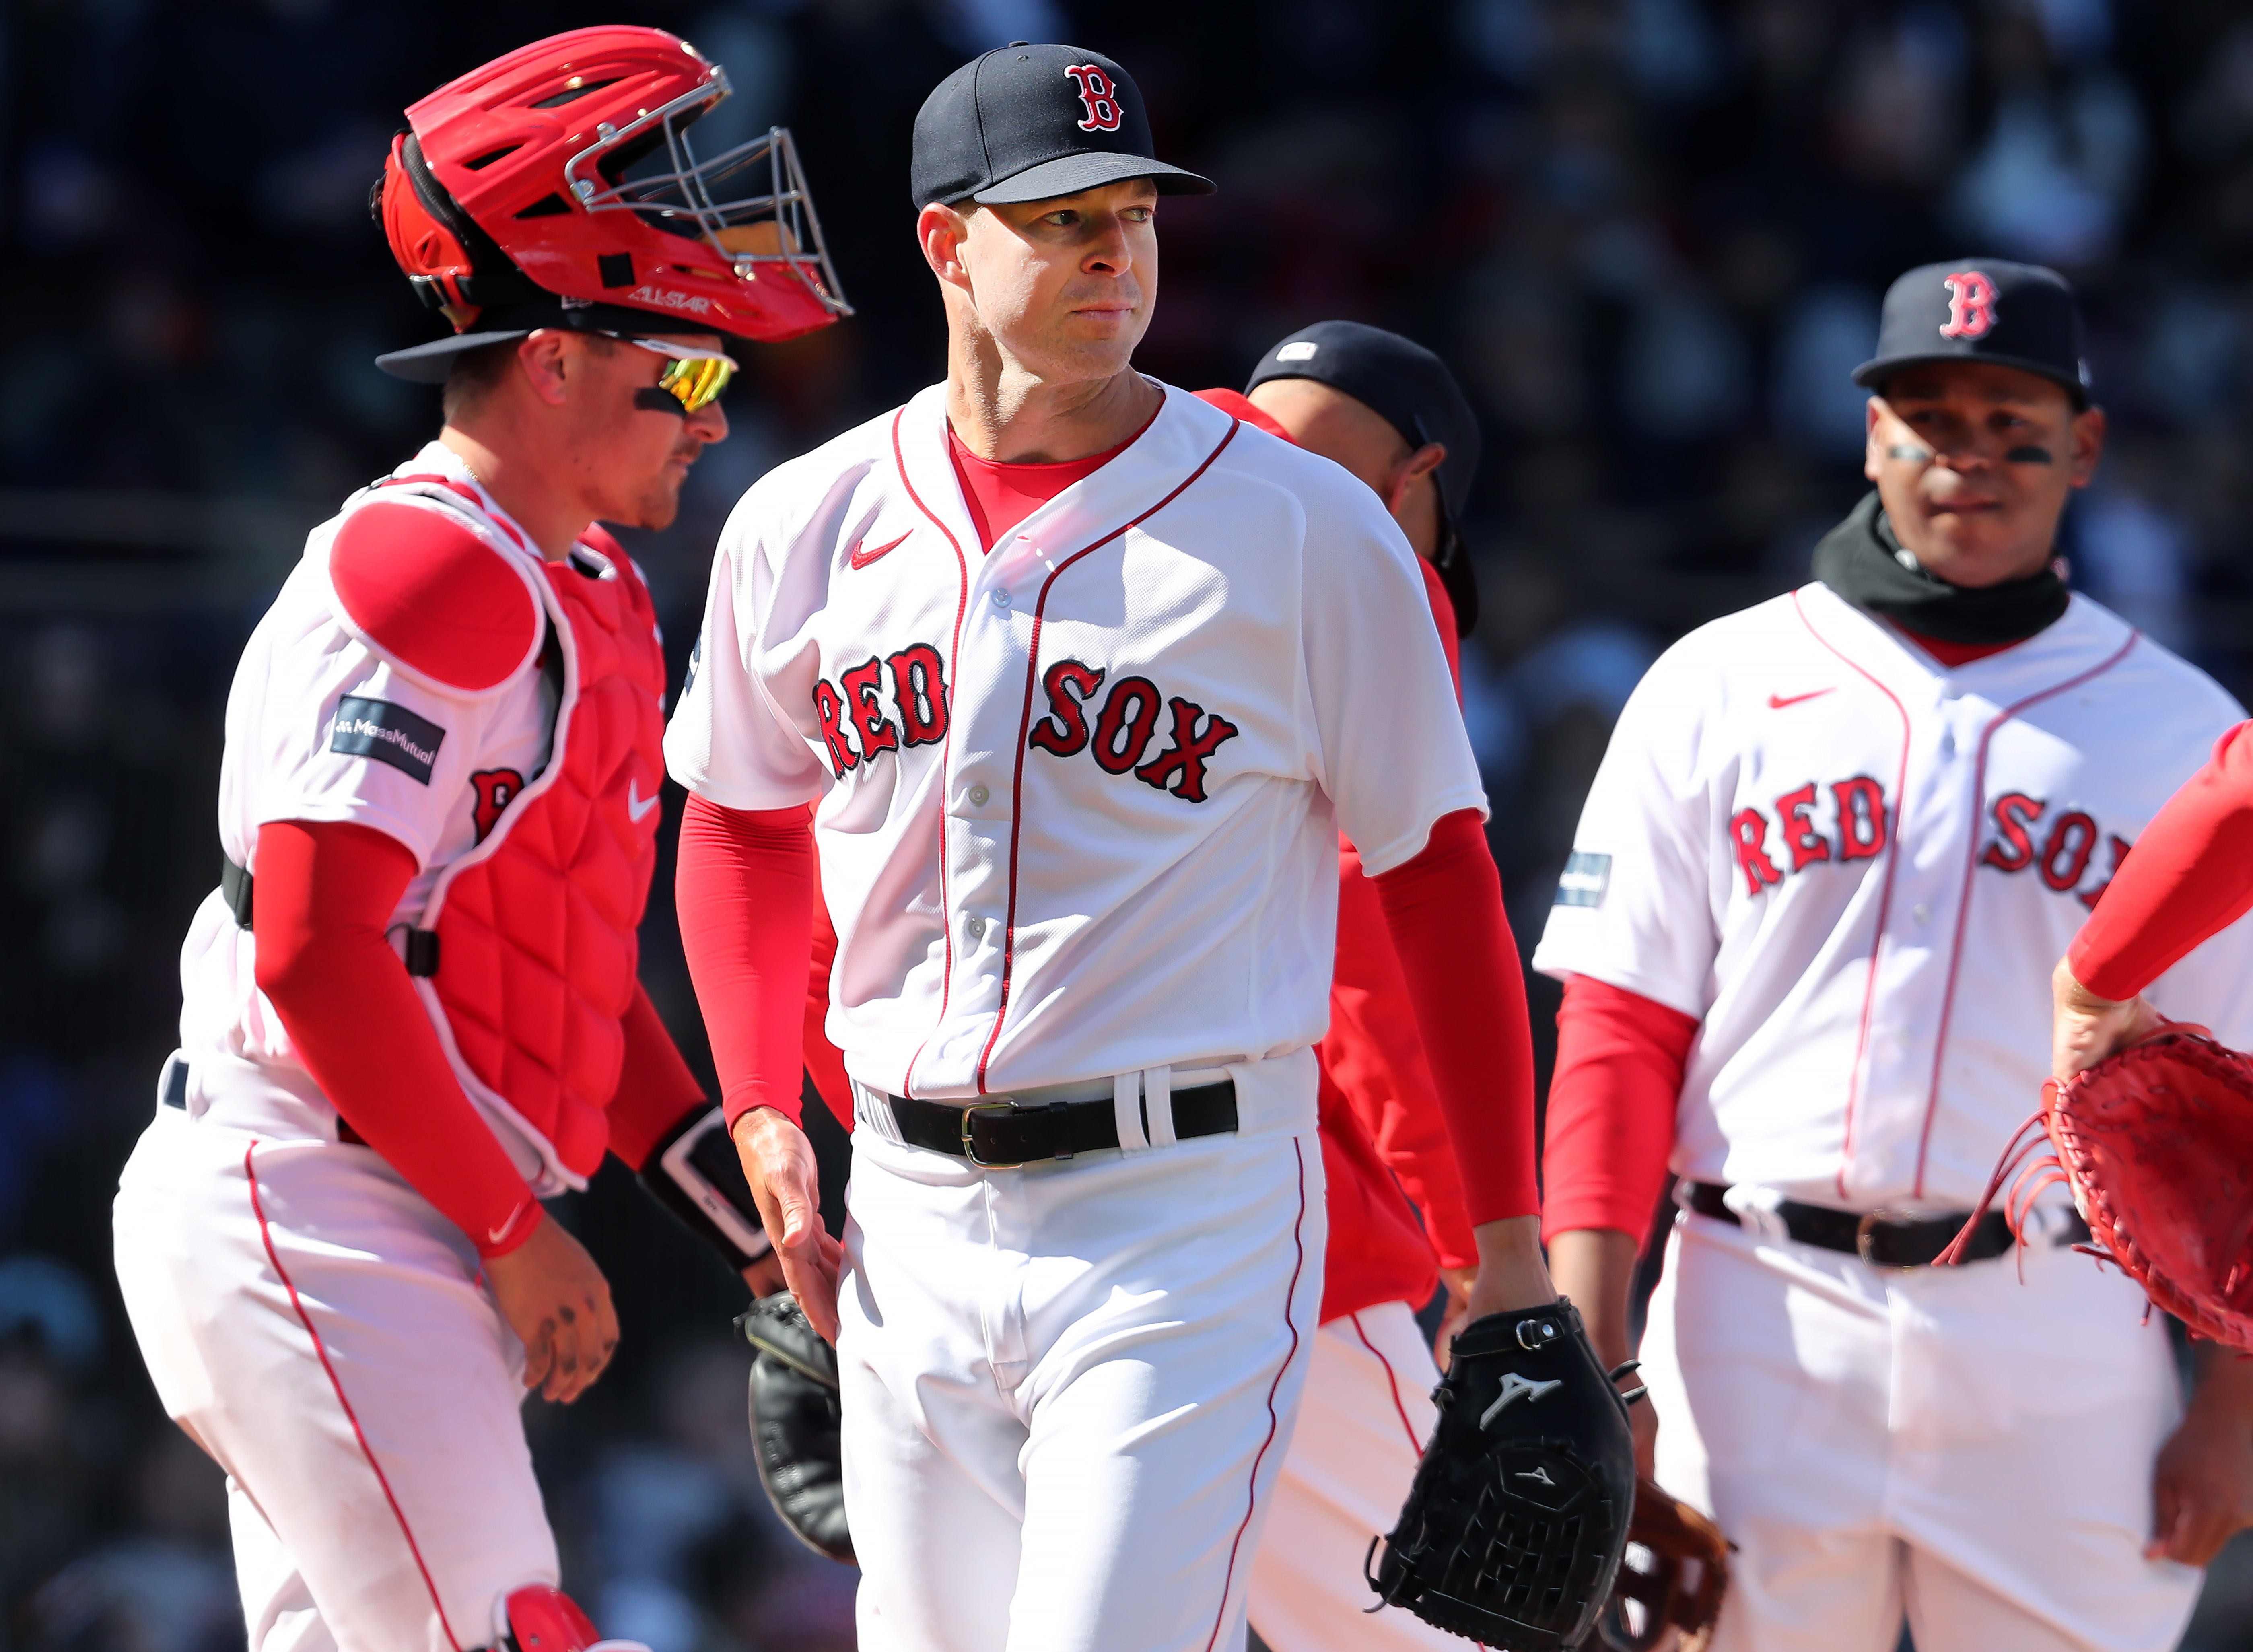 Photos: Red Sox welcome new season with Opening Day at Fenway